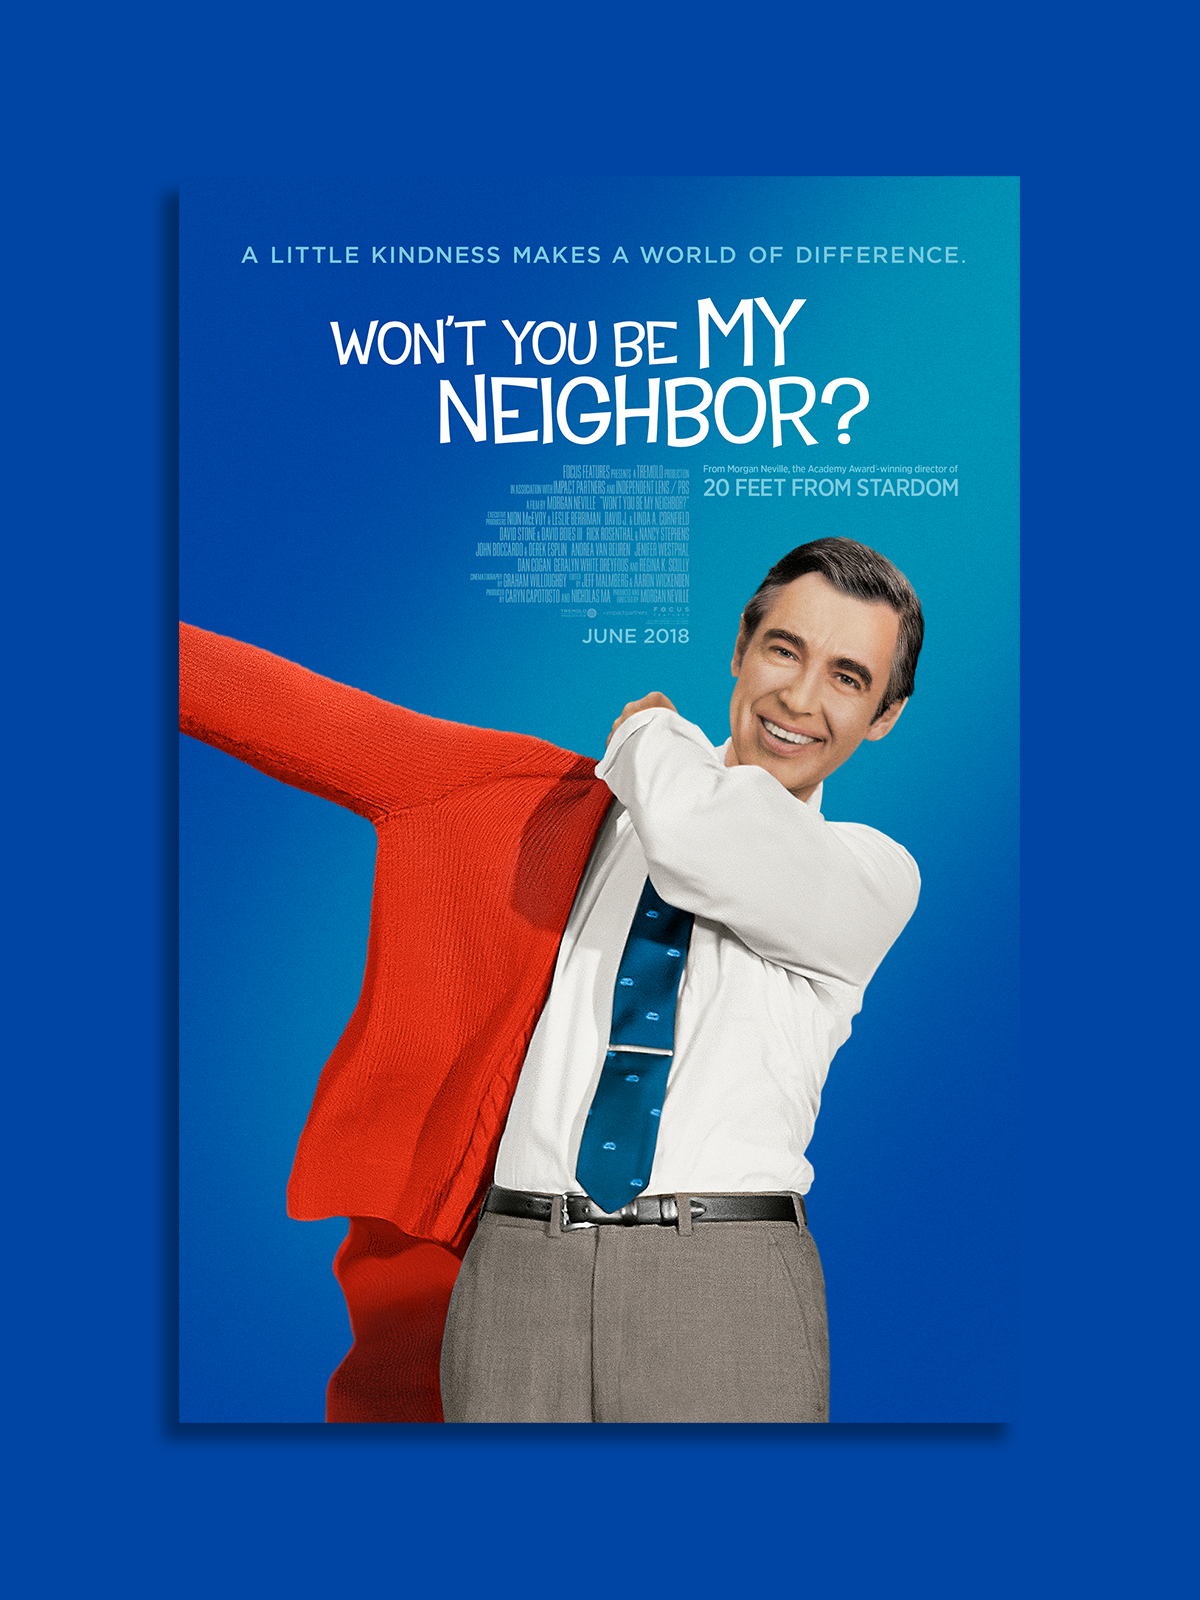 Won't You Be My Neighbor? Break out the tissues: the qualities that made Mister Rogers the most endearing guy on television are on full display throughout this look behind-the-curtain that lets us get to know the real Fred a little better. Turns out, all those silly songs and make believe moments were born of an unwavering vision and trailblazing spirit. His life is a true testament to the incredible effects of kindness. When faced with a tough choice, I've found myself asking: "What would Fred Rogers do?"